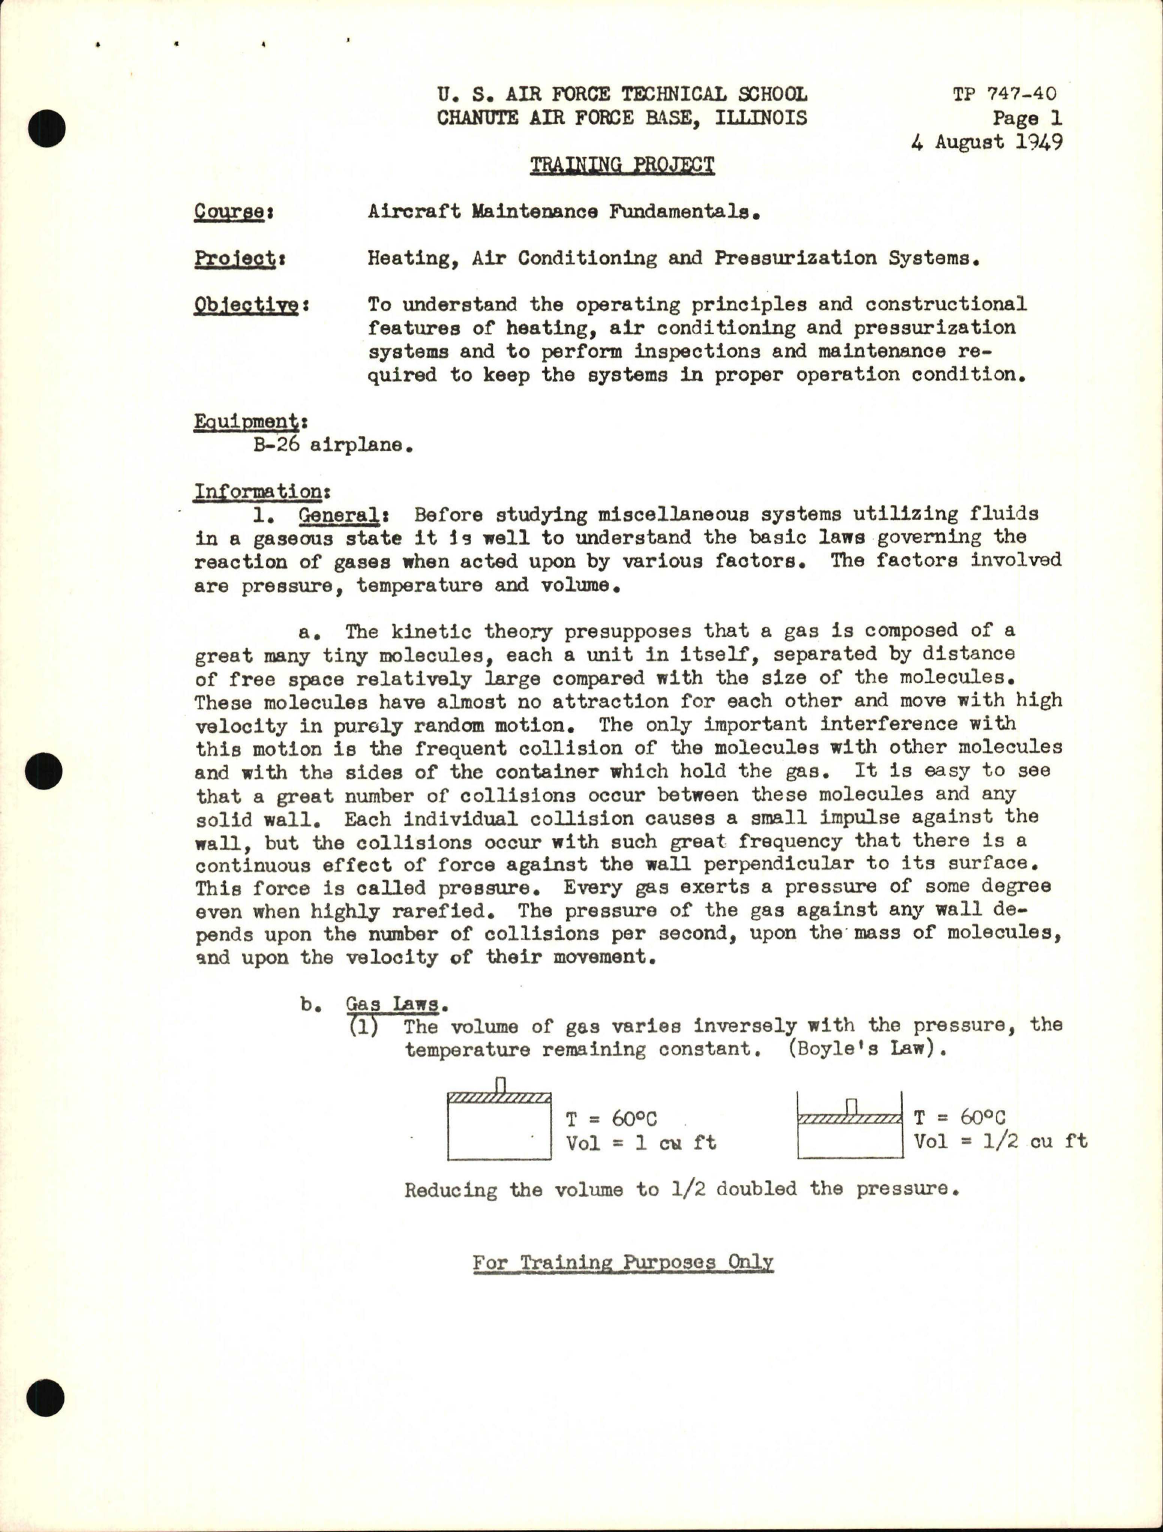 Sample page 1 from AirCorps Library document: Training Project, Heating, Air Conditioning and Pressurization Systems